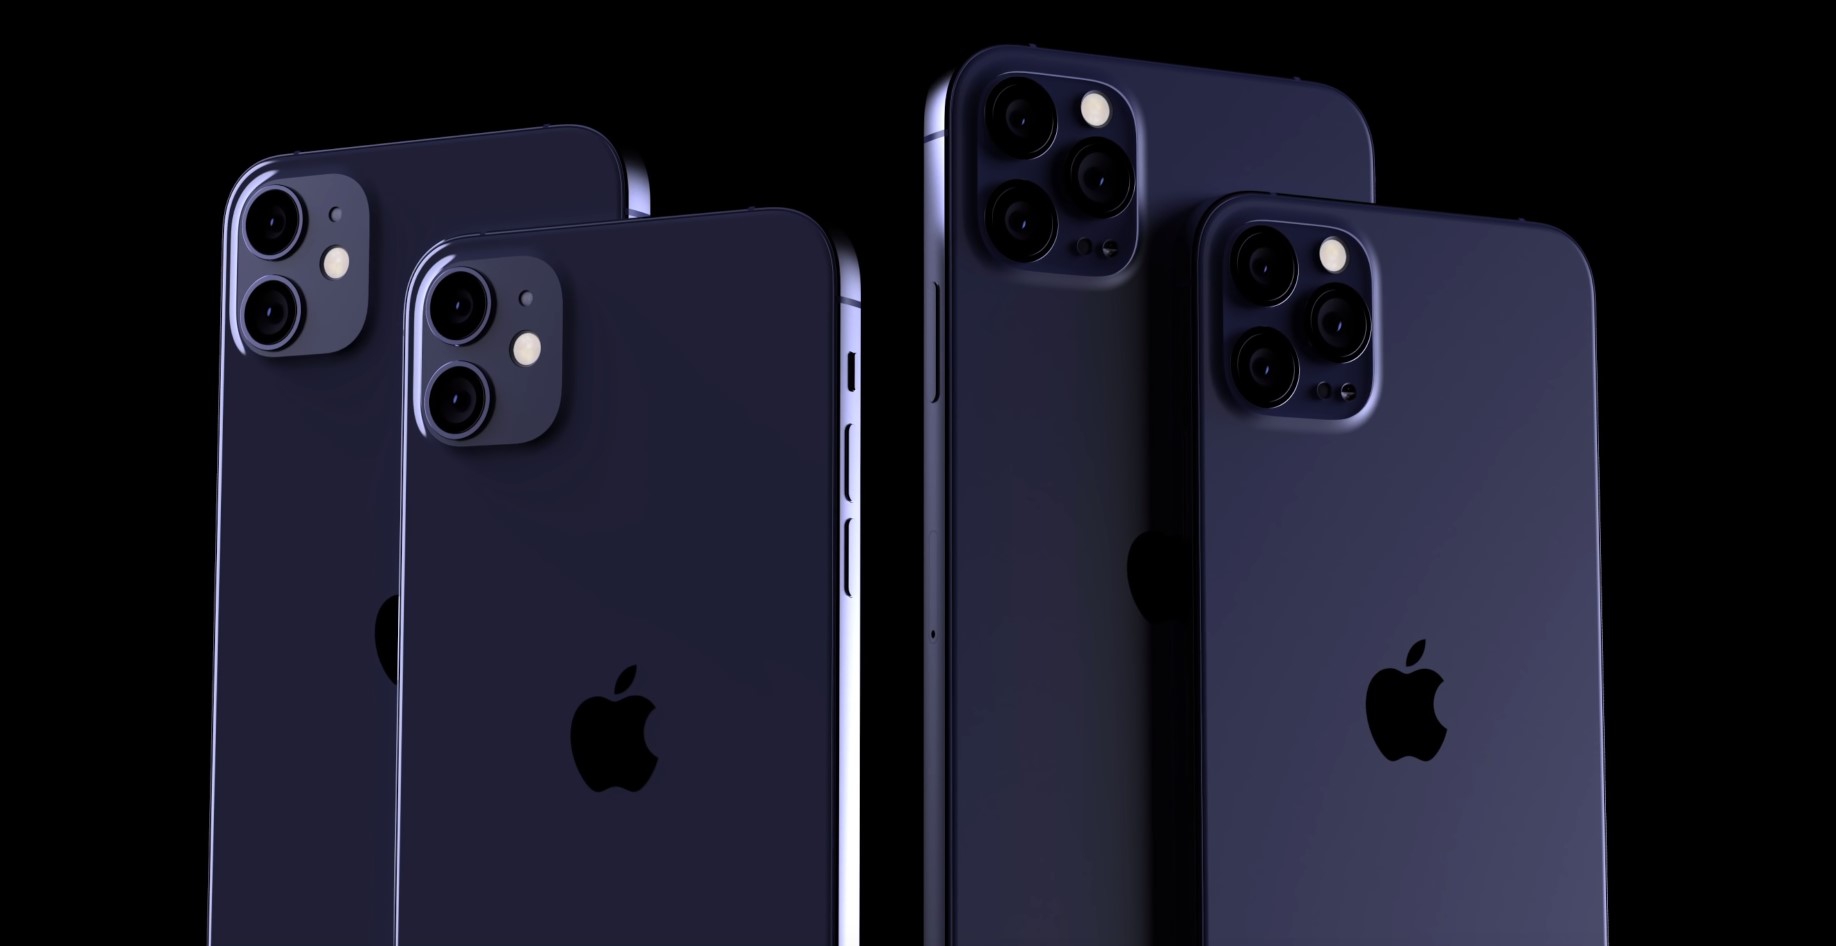 upcoming-5-4-inch-iphone-may-be-called-iphone-12-mini